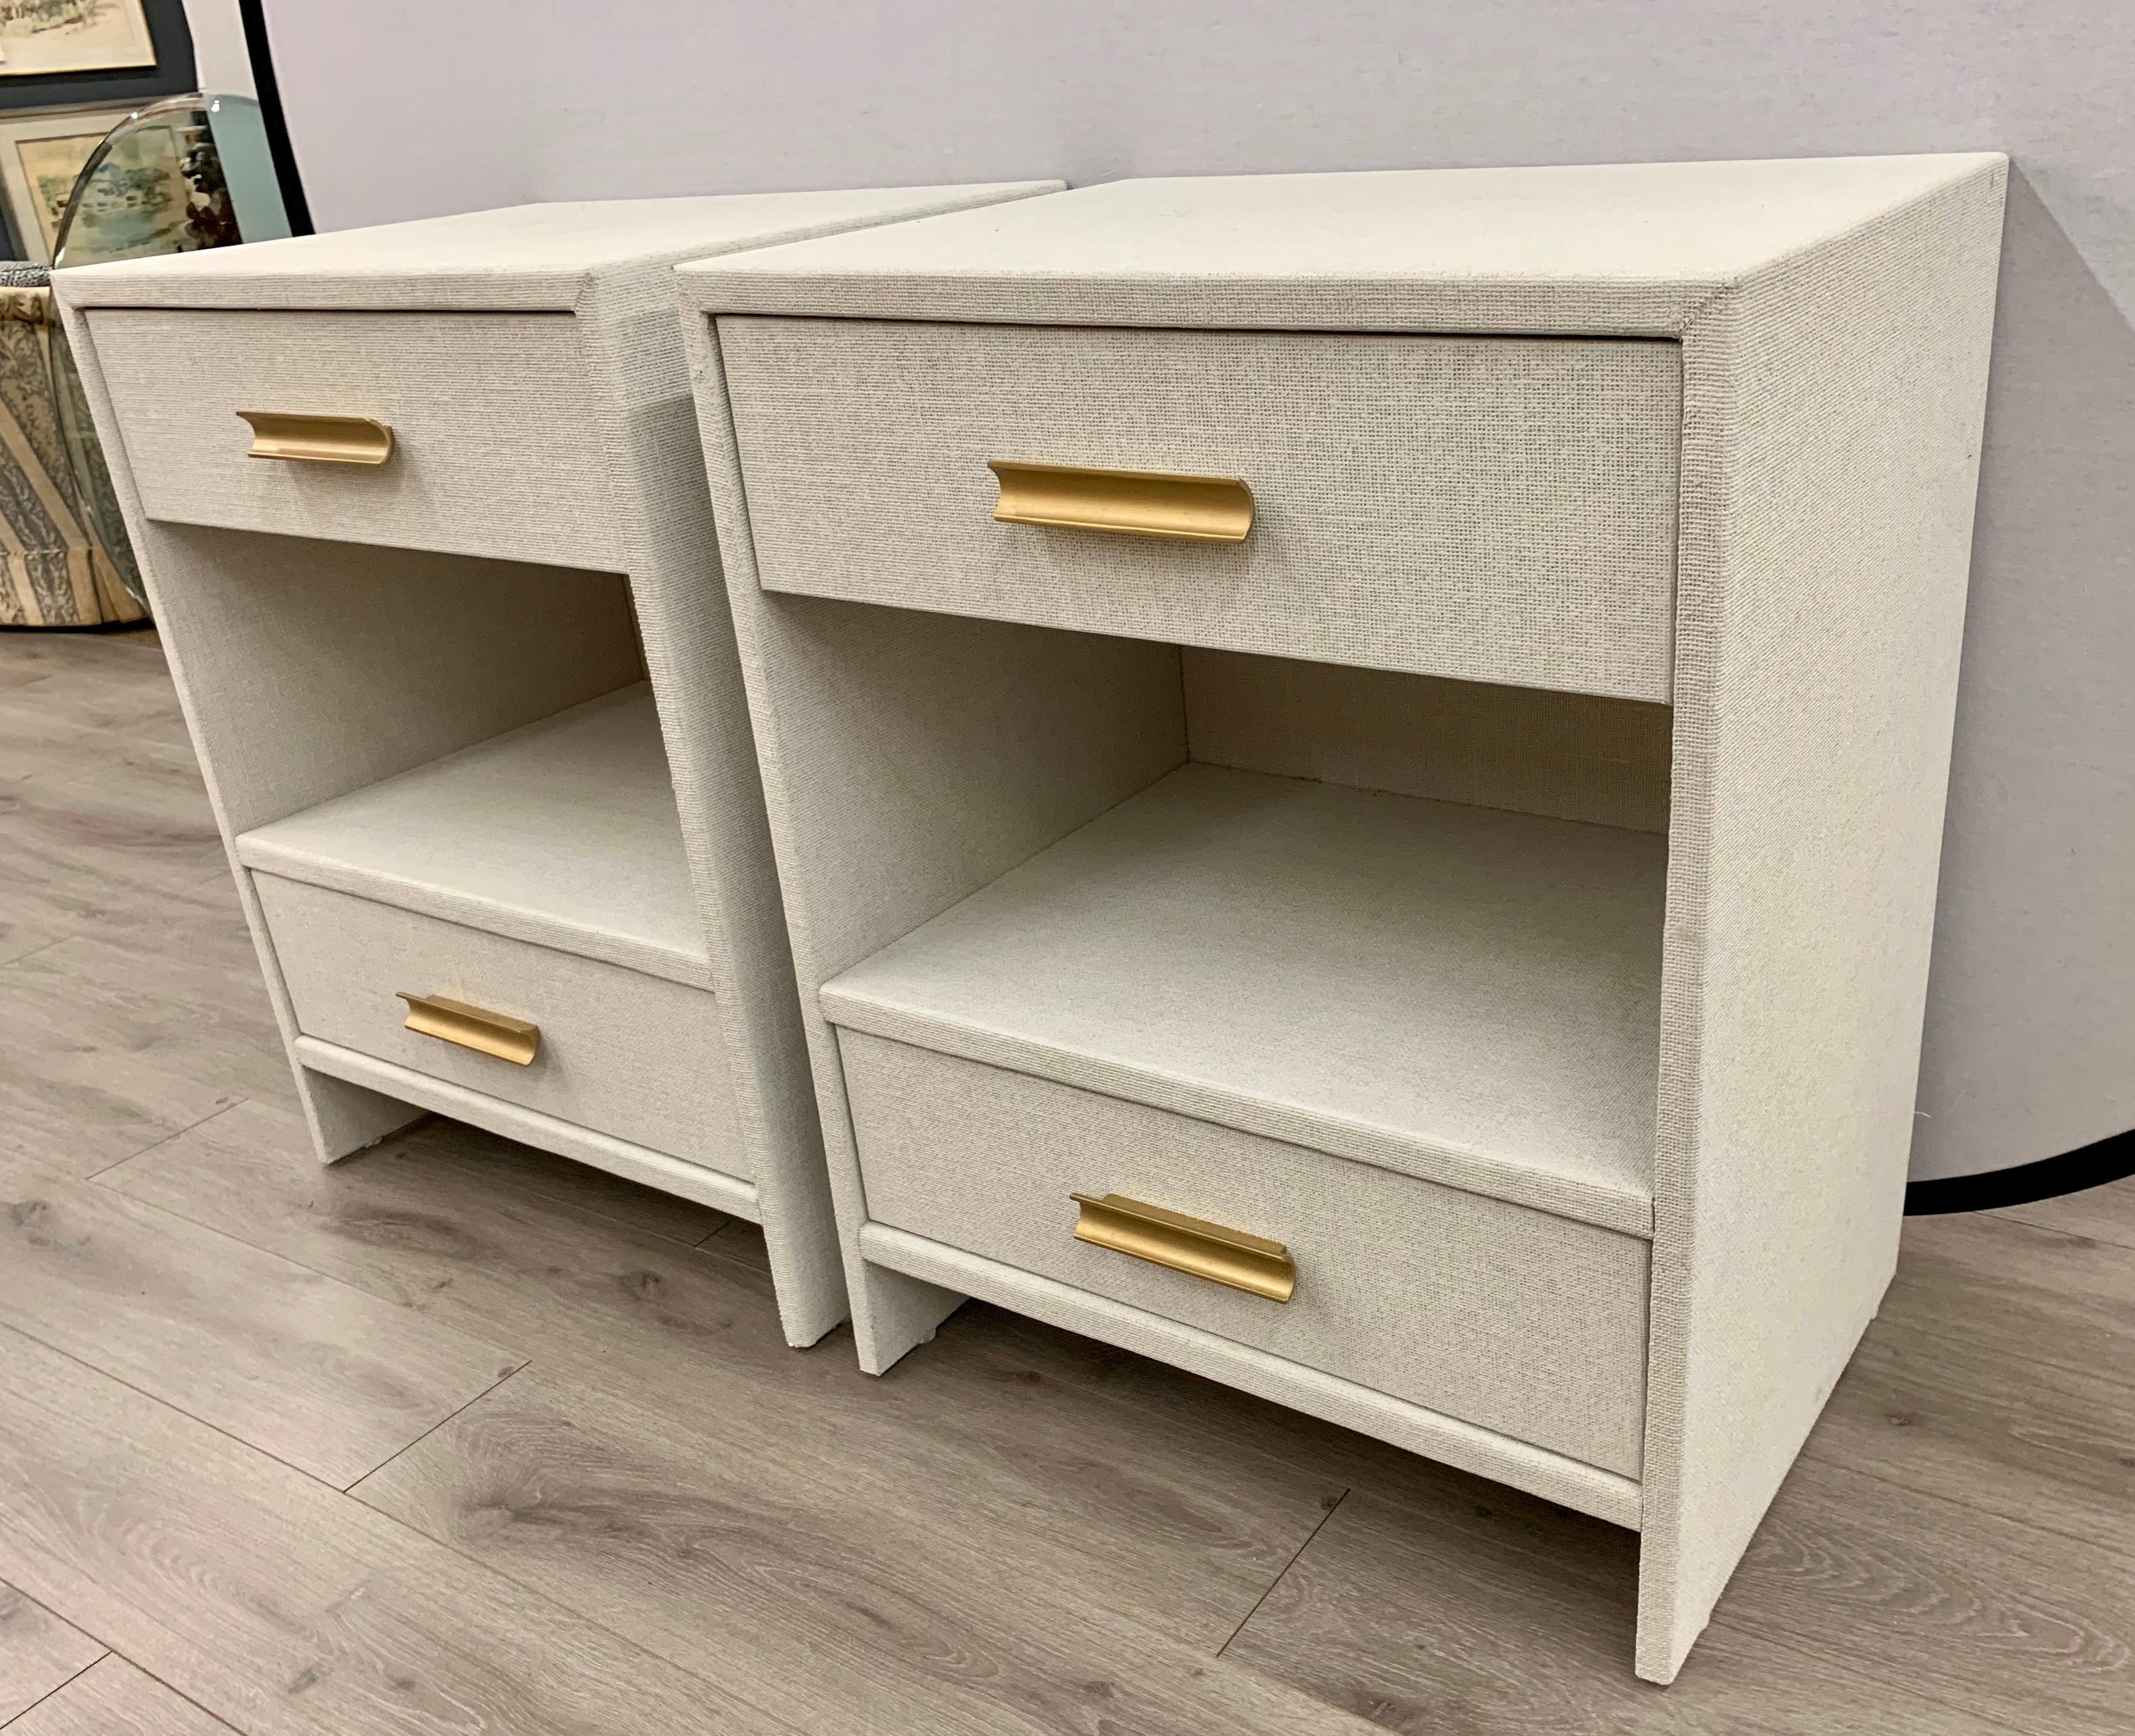 Sleek, simple lines give these nightstands a Mid-Century Modern feel and are wrapped by hand in fine linen then given a multi-layered paint glaze in a neutral oyster color. They have two drawers with a center shelf. Brass handles give it a